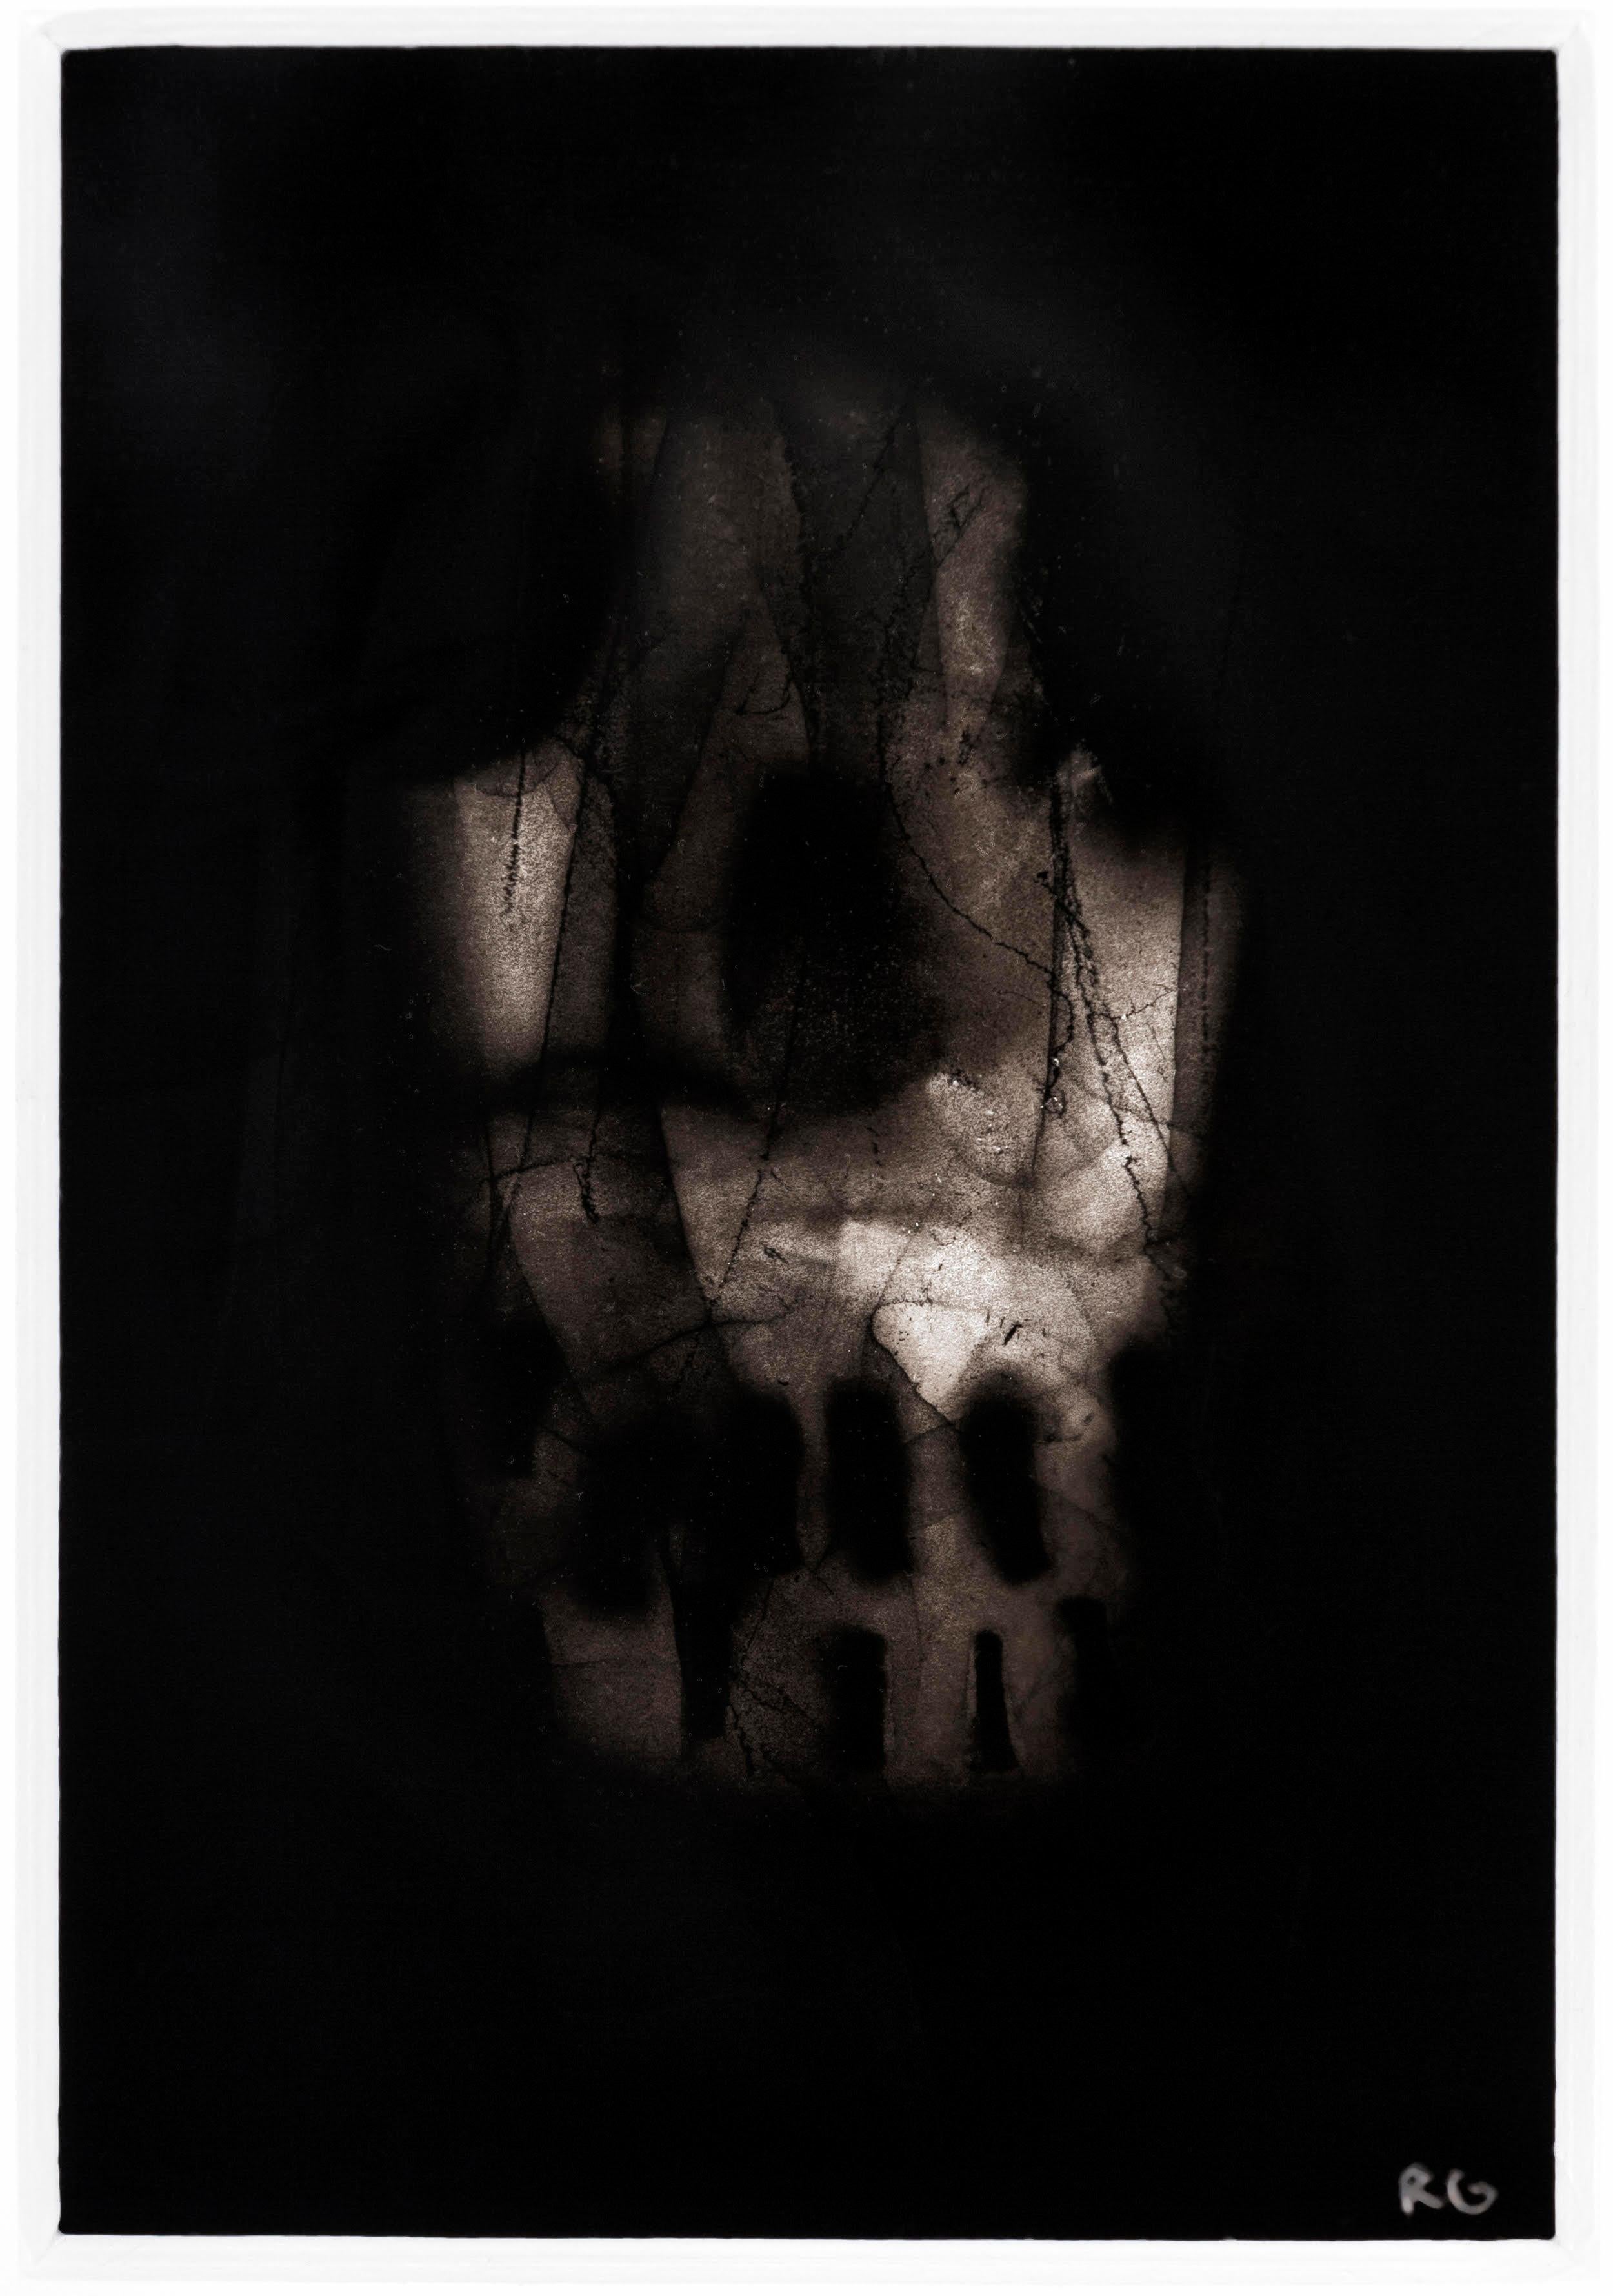 Skull is a black flame drawing on paper. The artist uses a flame from a torch with precise speed and distance from the paper, which leaves carbon deposits behind in varying degrees of value and rich velvety blacks. The process provides a shadowy